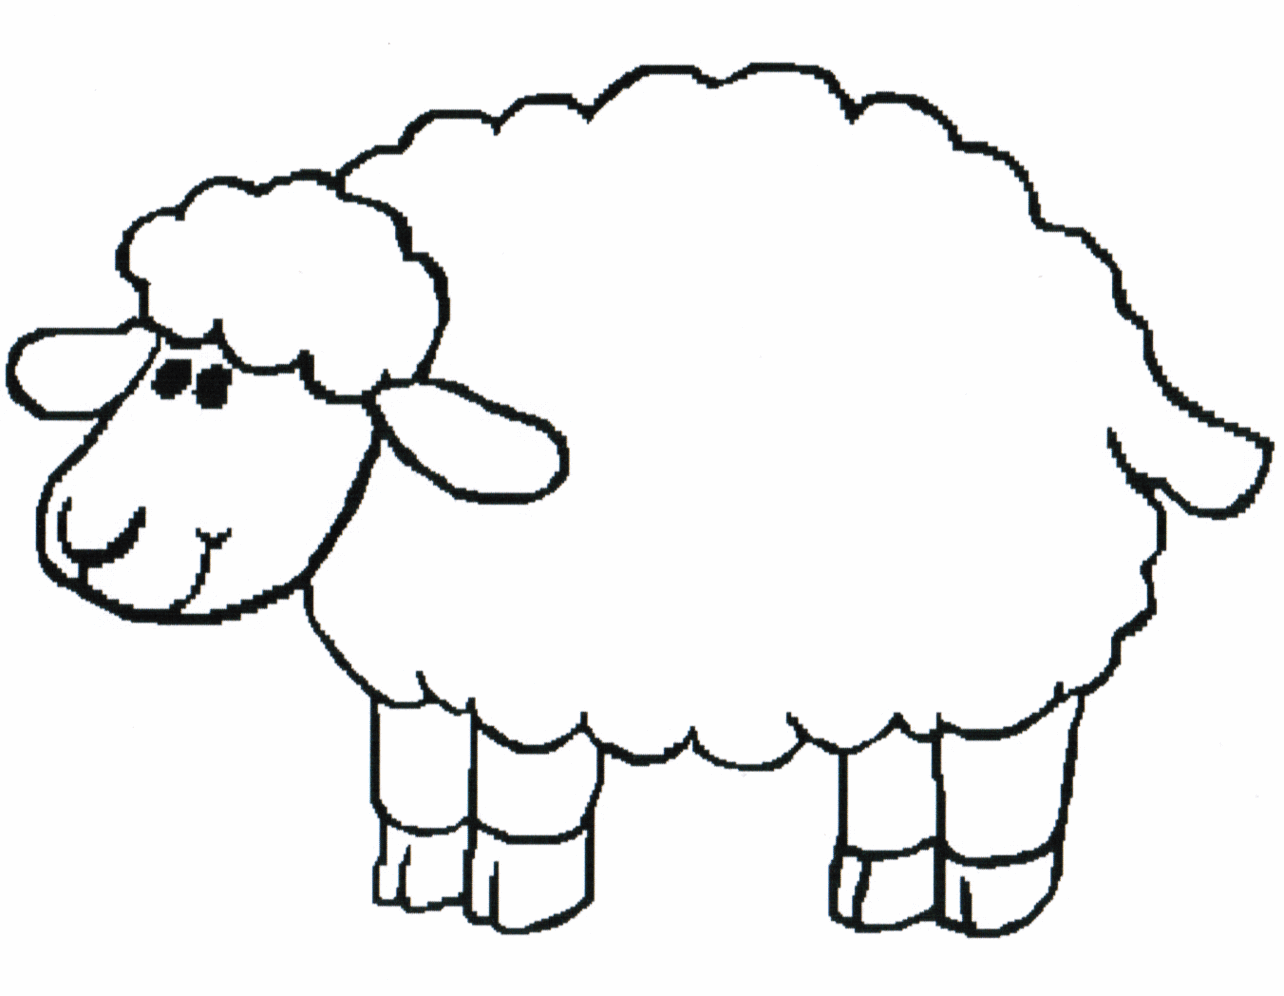 Lamb clipart draw. How to a sheep